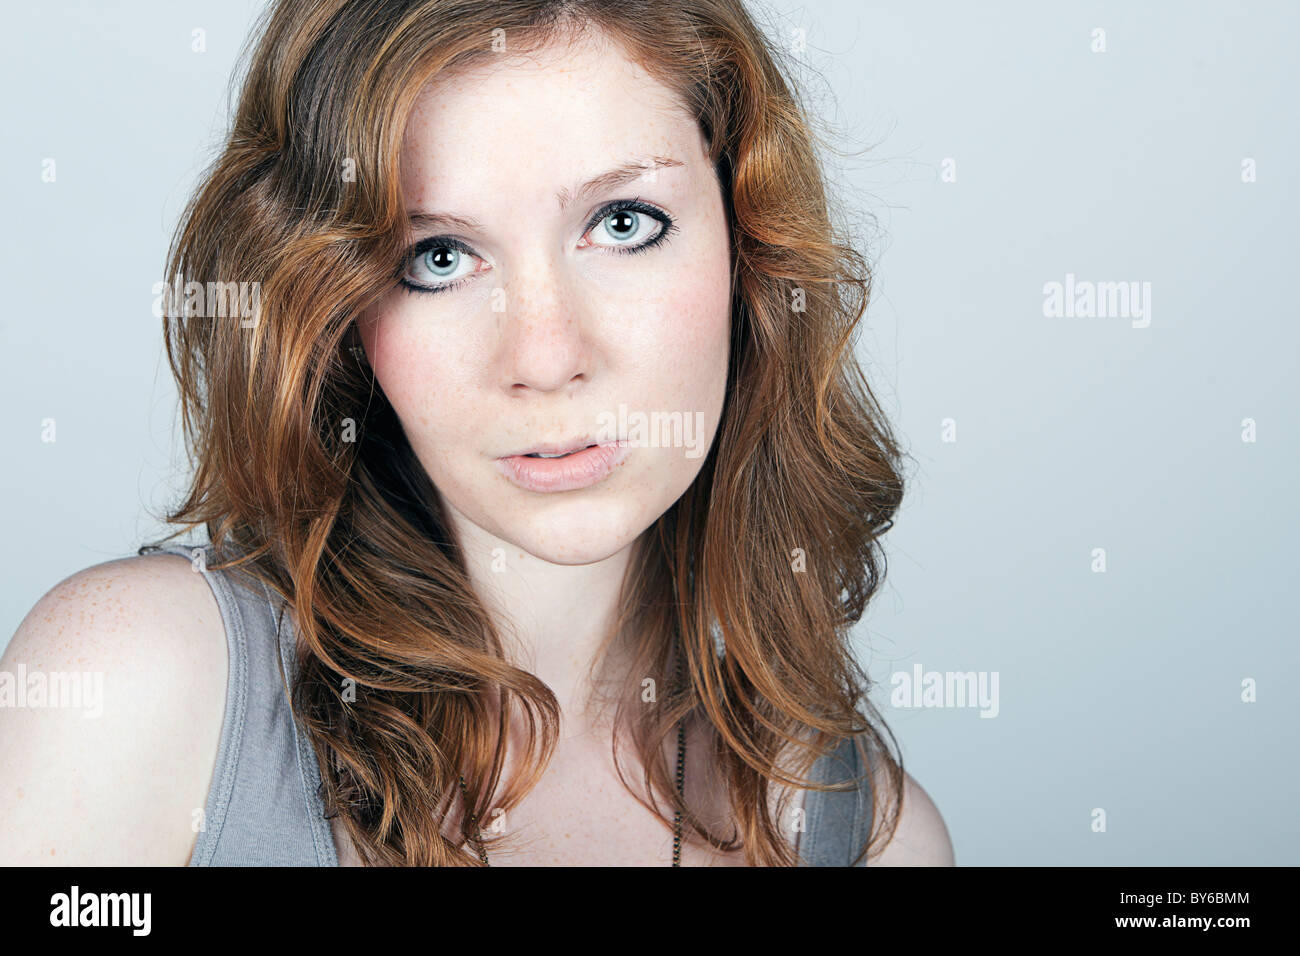 Shot of a Beautiful Red Headed Girl Stock Photo - Alamy